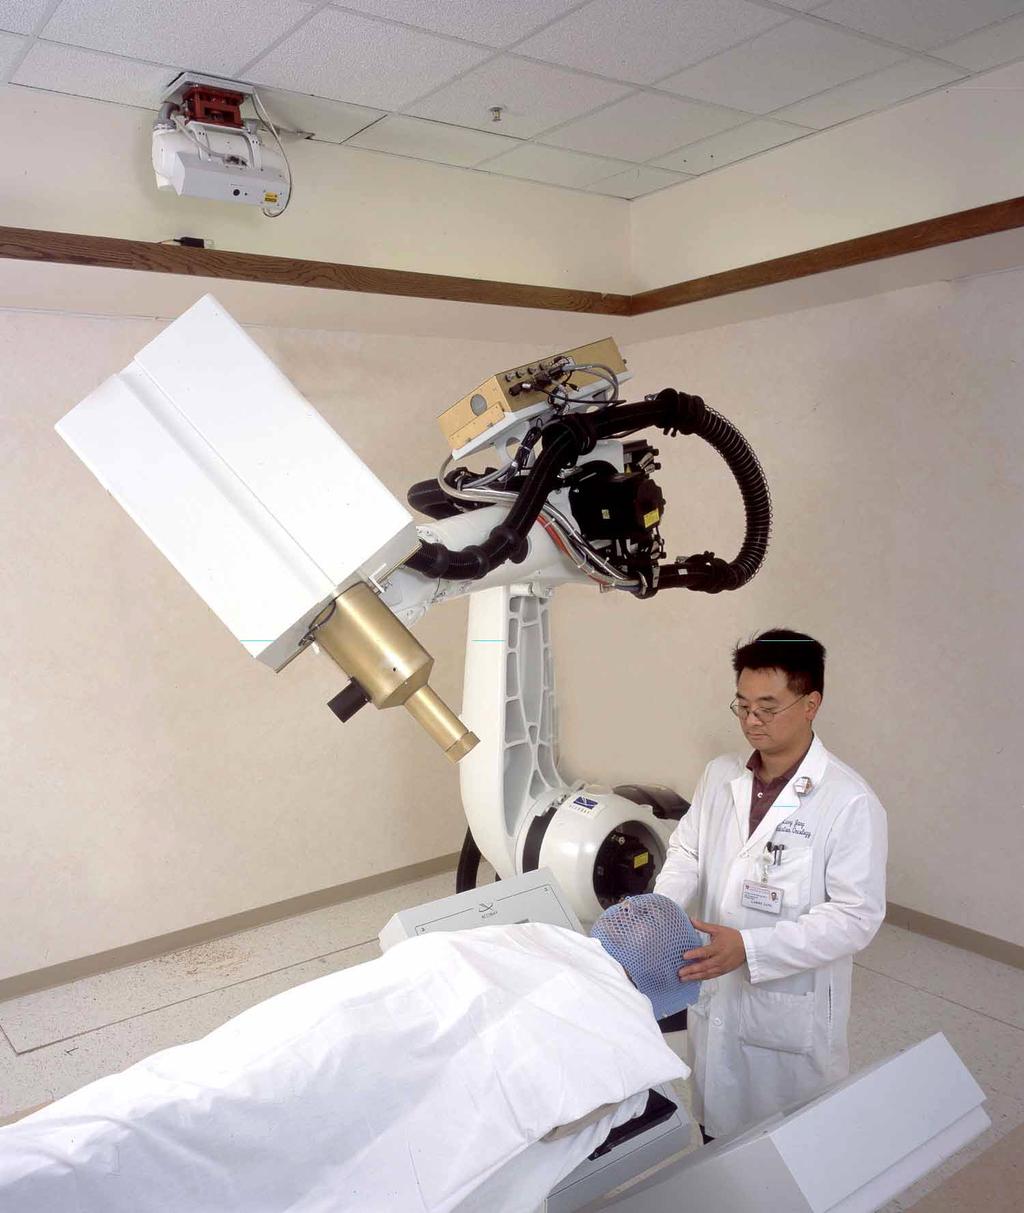 industrial robot is used to move a small linear accelerator through a preplanned path to focus an array of beams from many different directions.